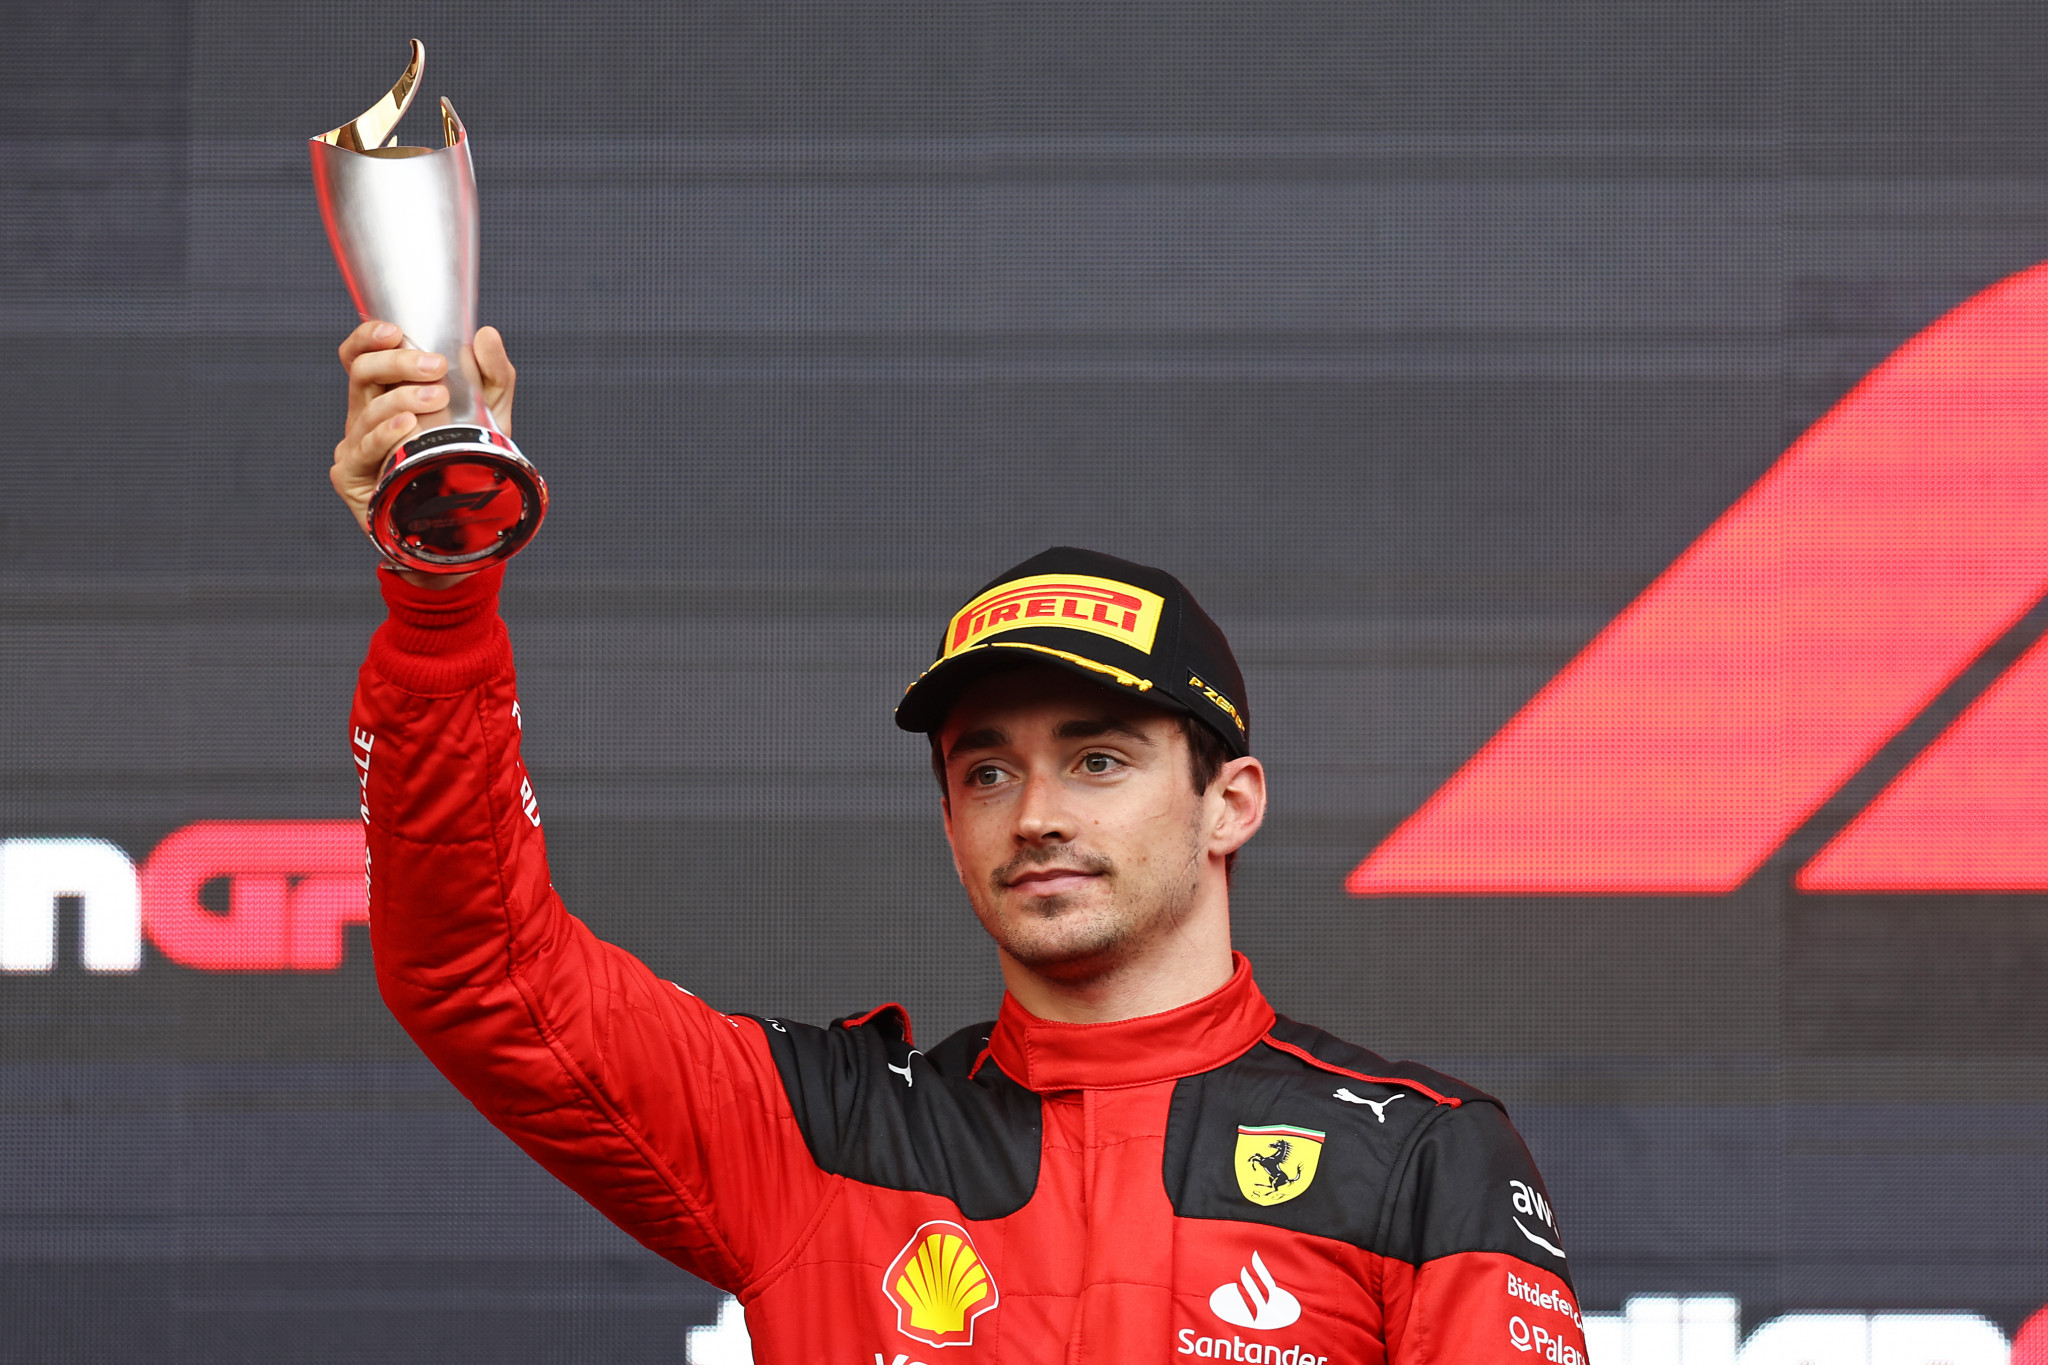 Charles Leclerc had to settle for third place despite starting the race on pole position ©Getty Images